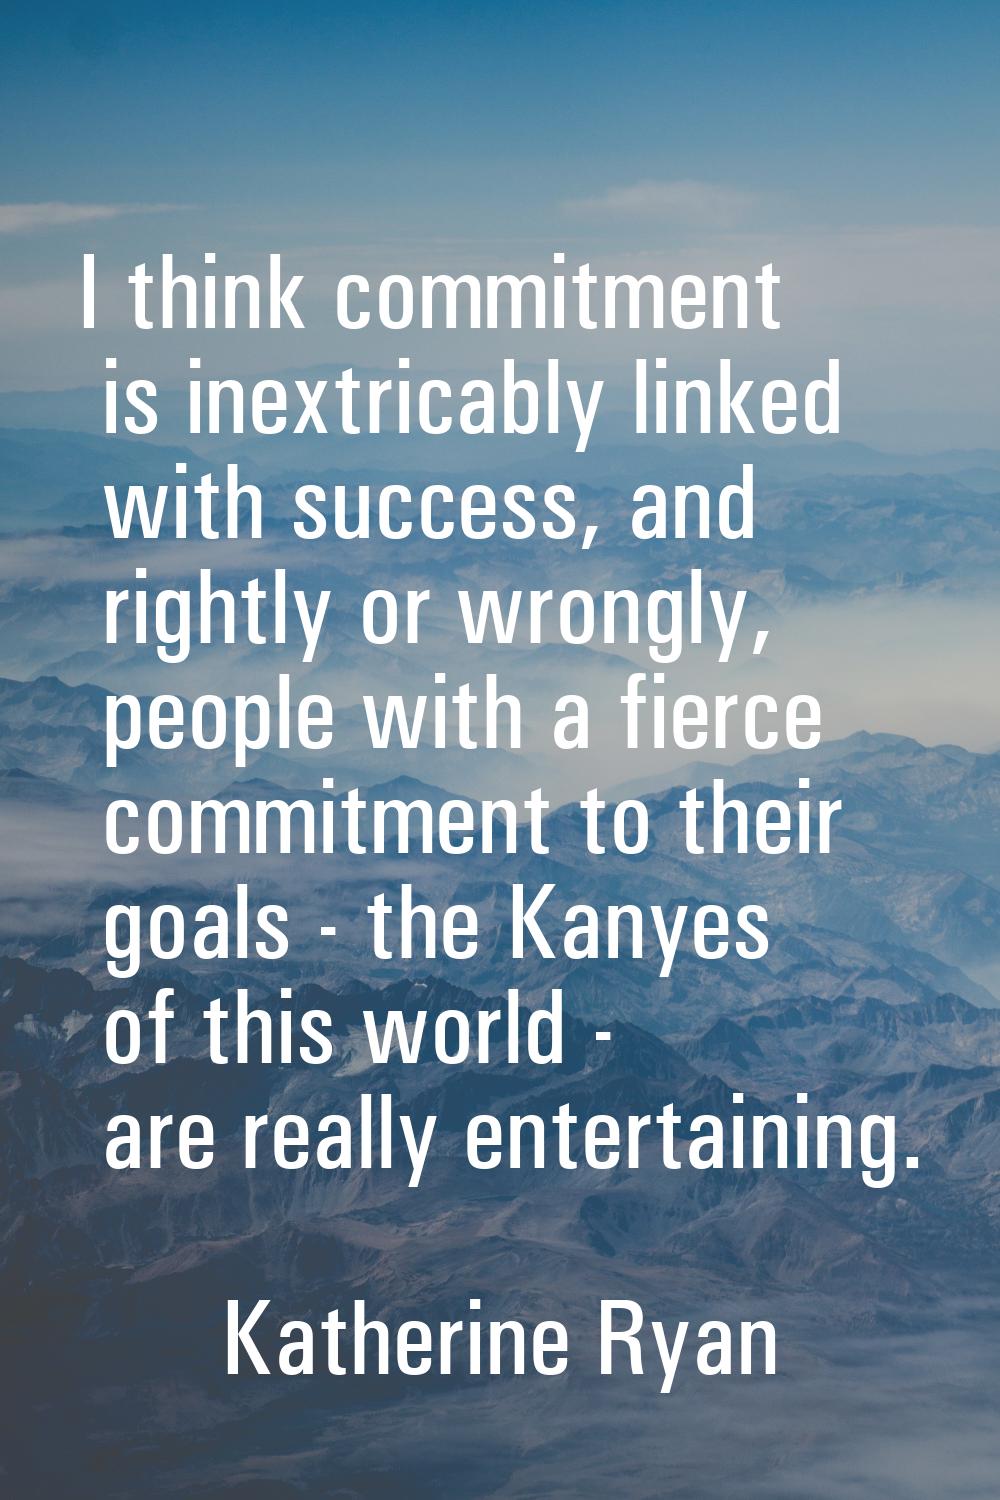 I think commitment is inextricably linked with success, and rightly or wrongly, people with a fierc